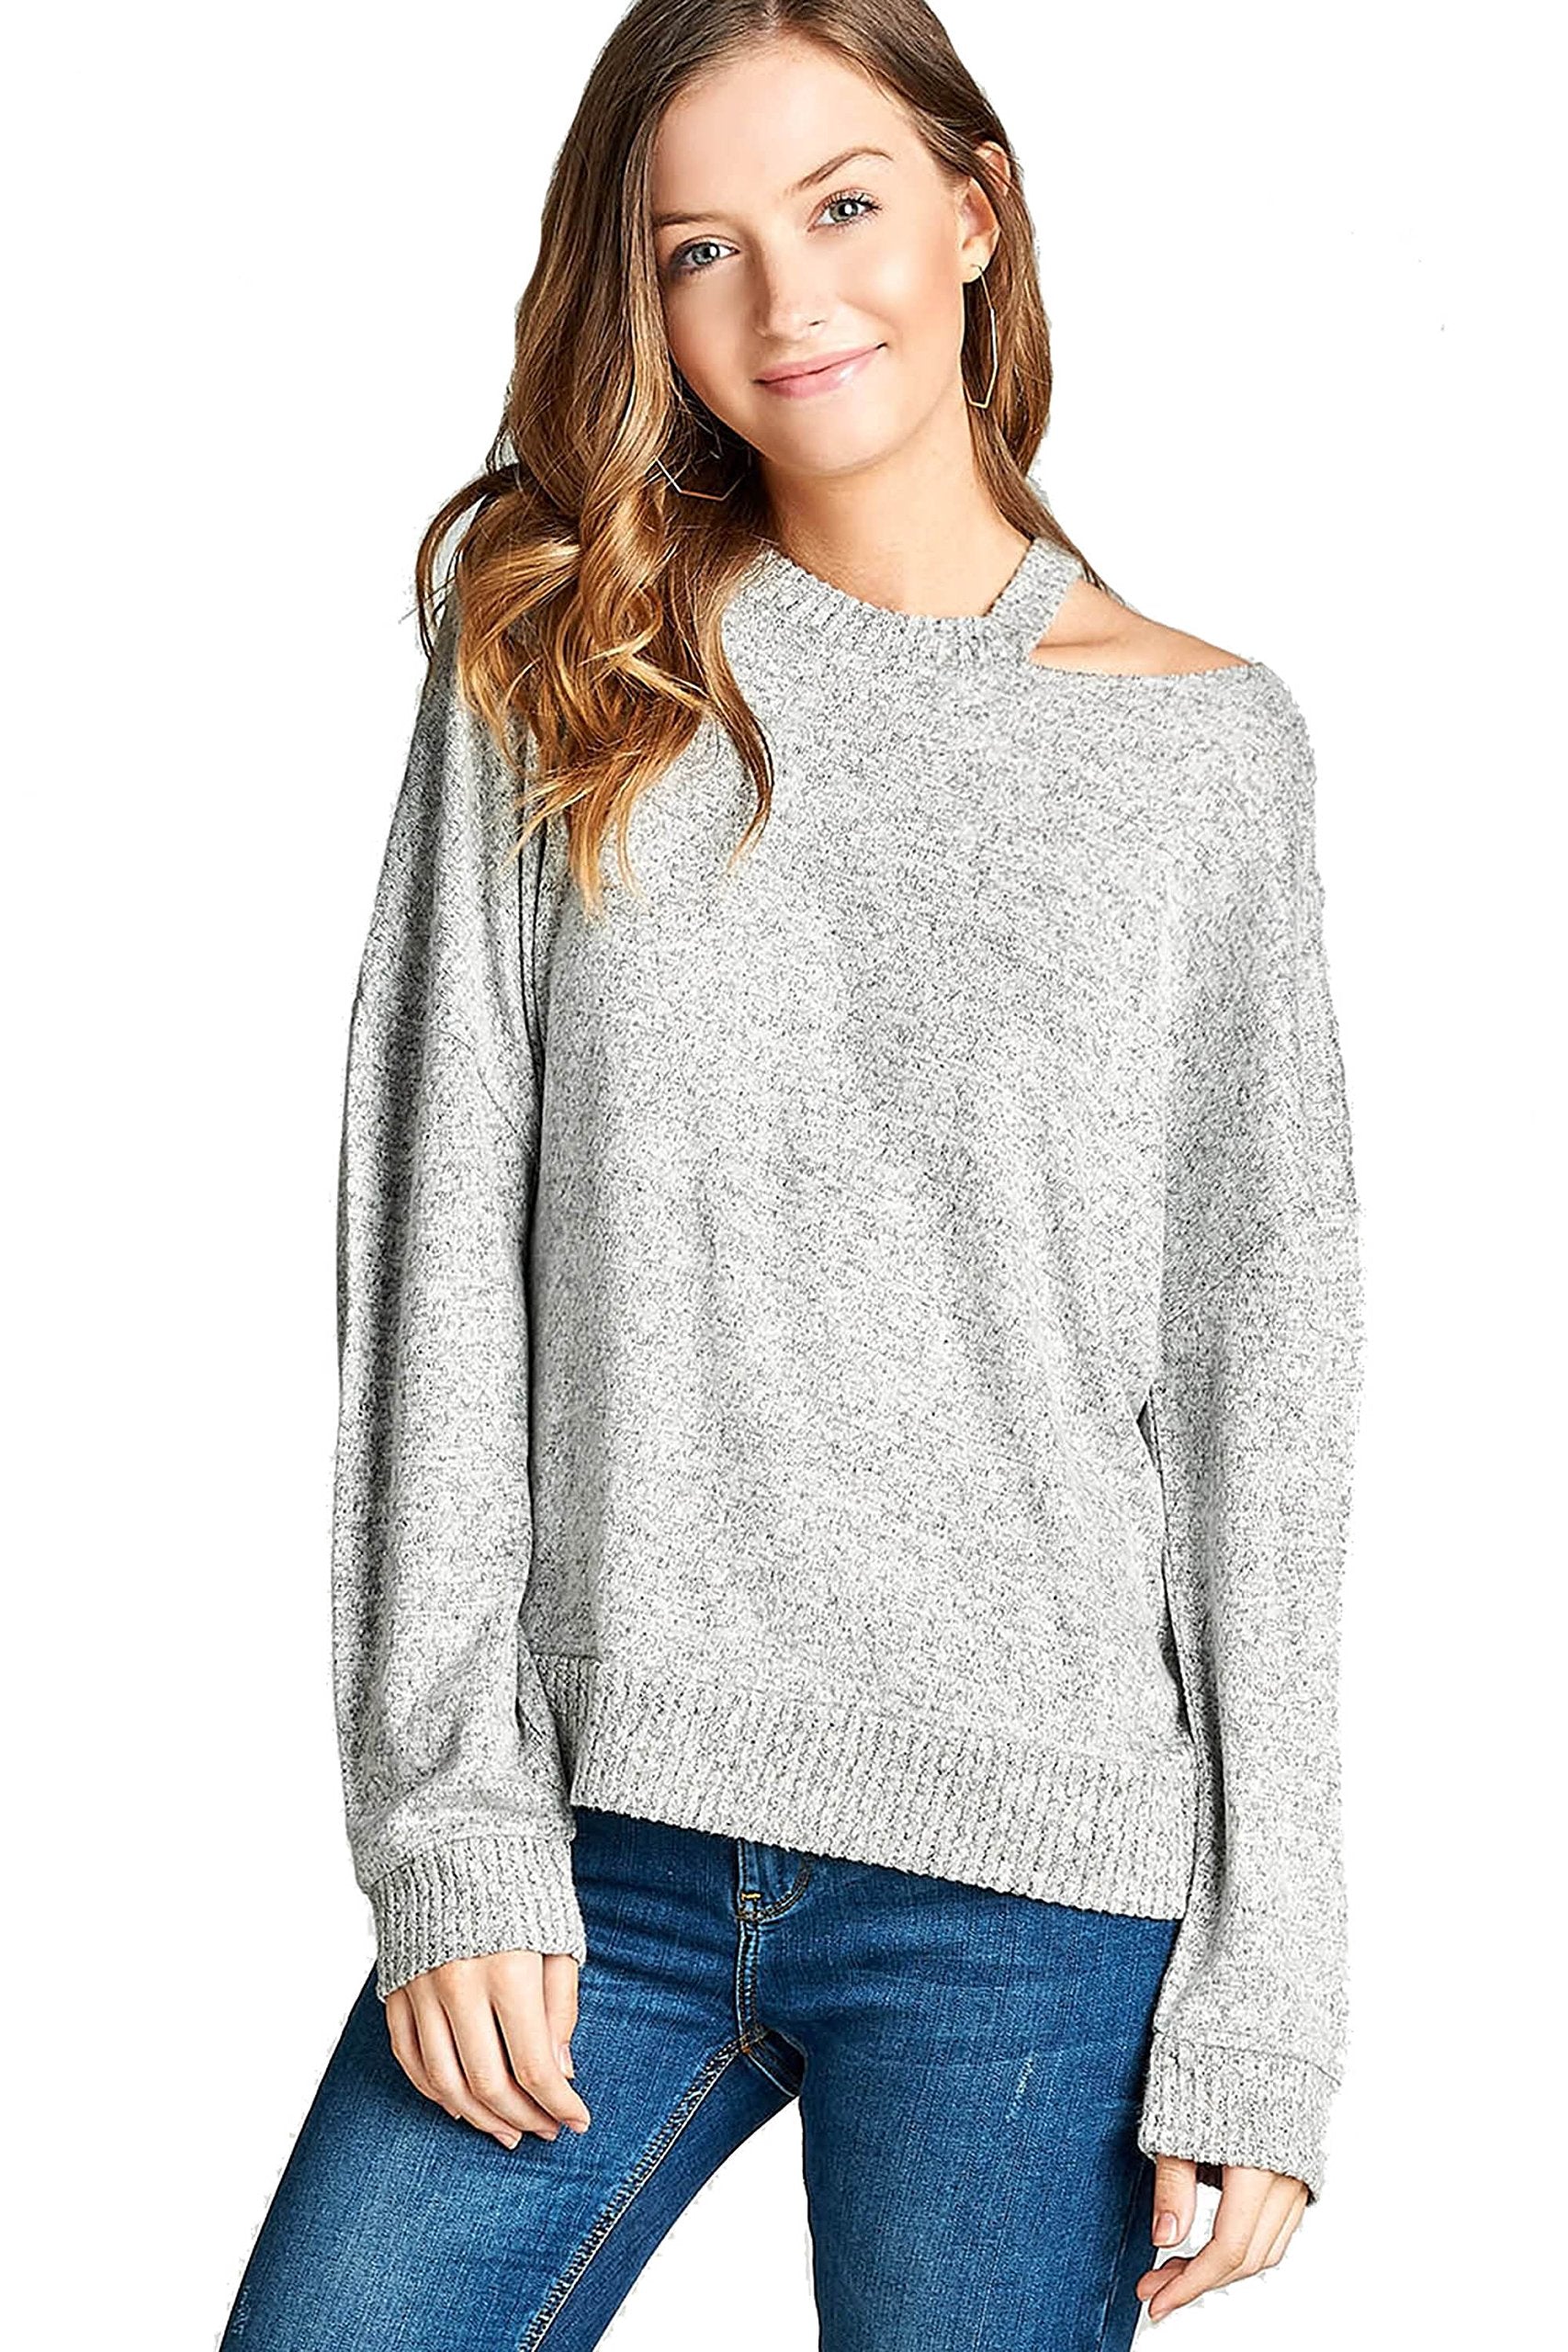 Casual Long Sleeve Round Neck Cutout Detail Knit Pullover Sweater Top